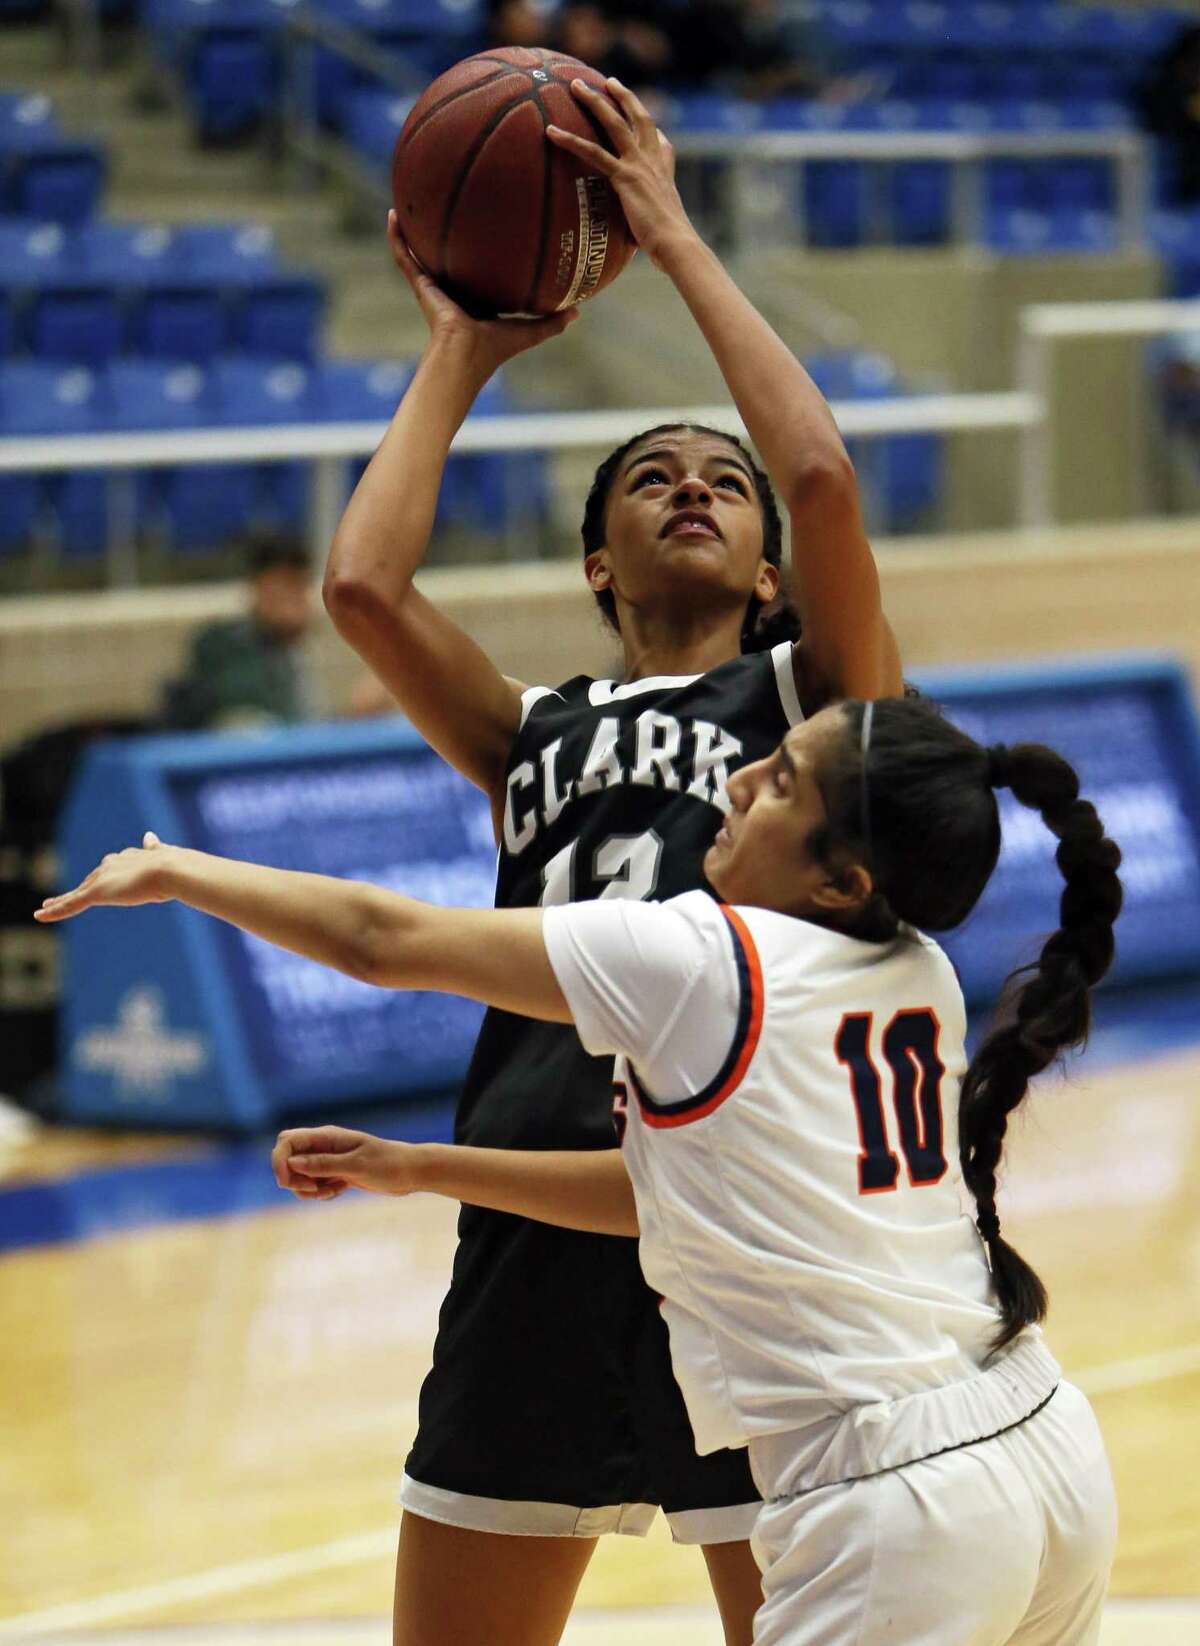 Clark center Arianna Roberson recorded three straight double-doubles, including 22 points and 12 rebounds in a win against Brandeis.